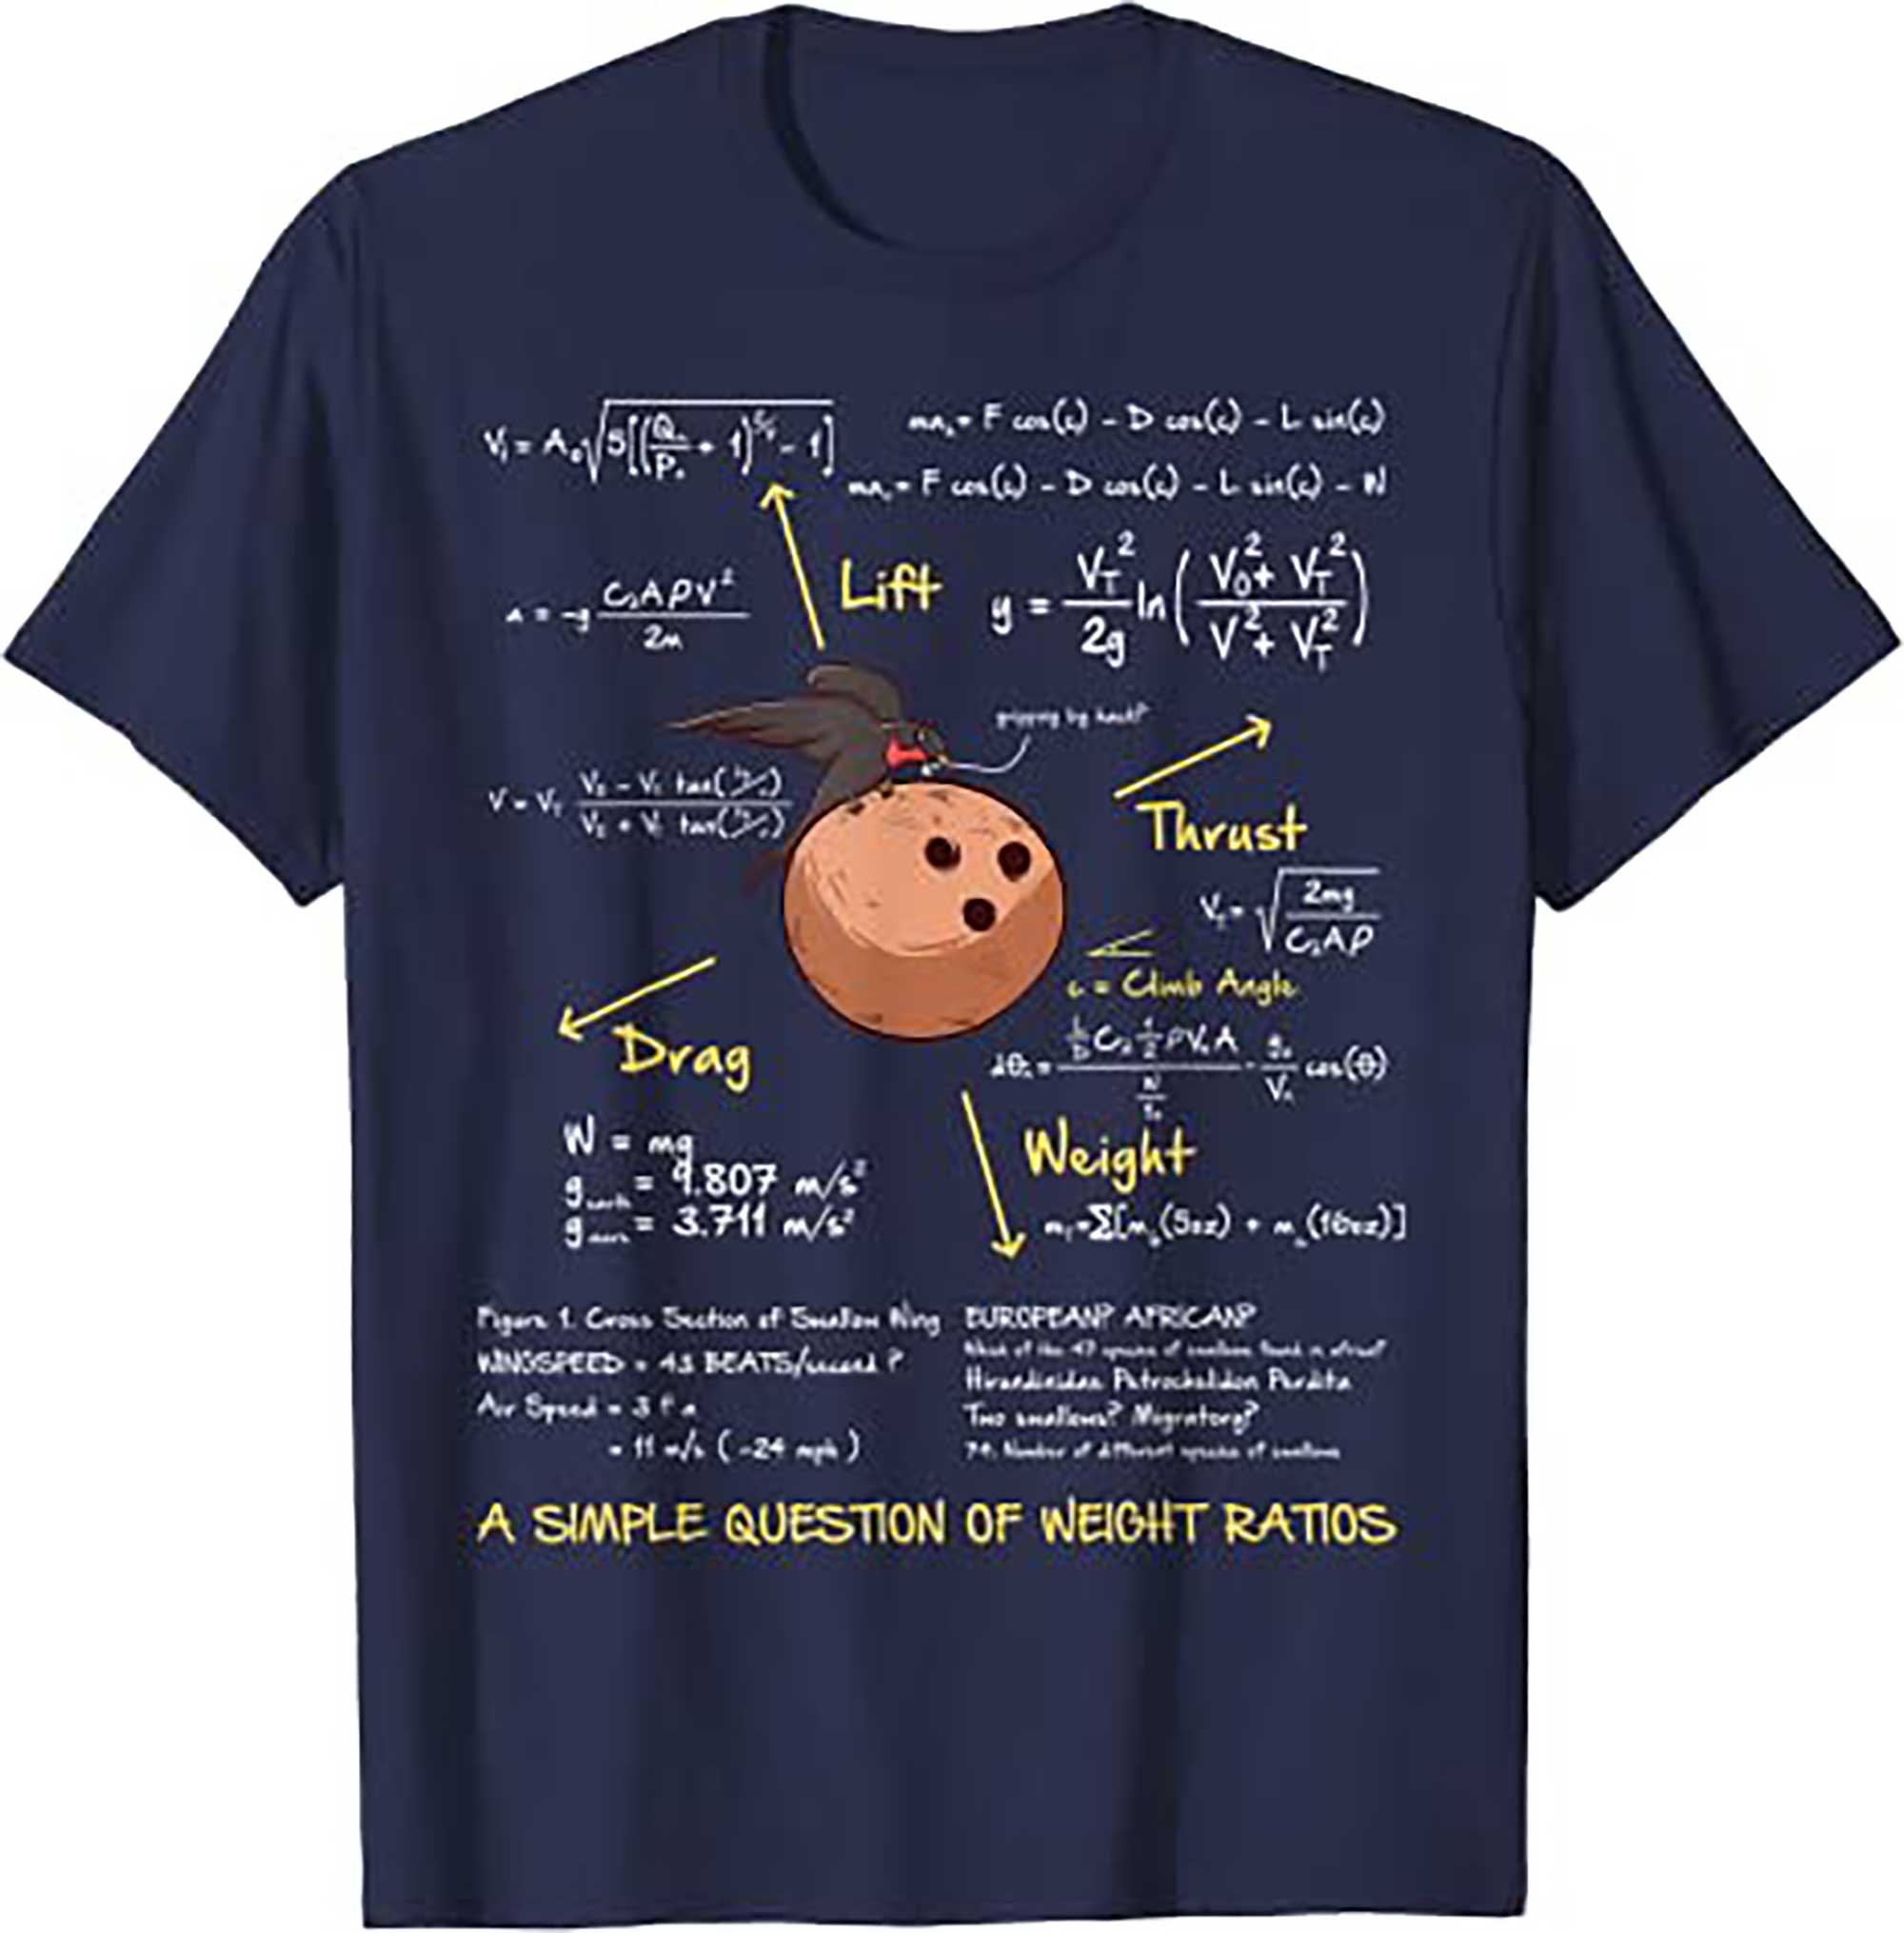 Skitongift A Simple Question Of Weight Ratios Funny Math T Shirt